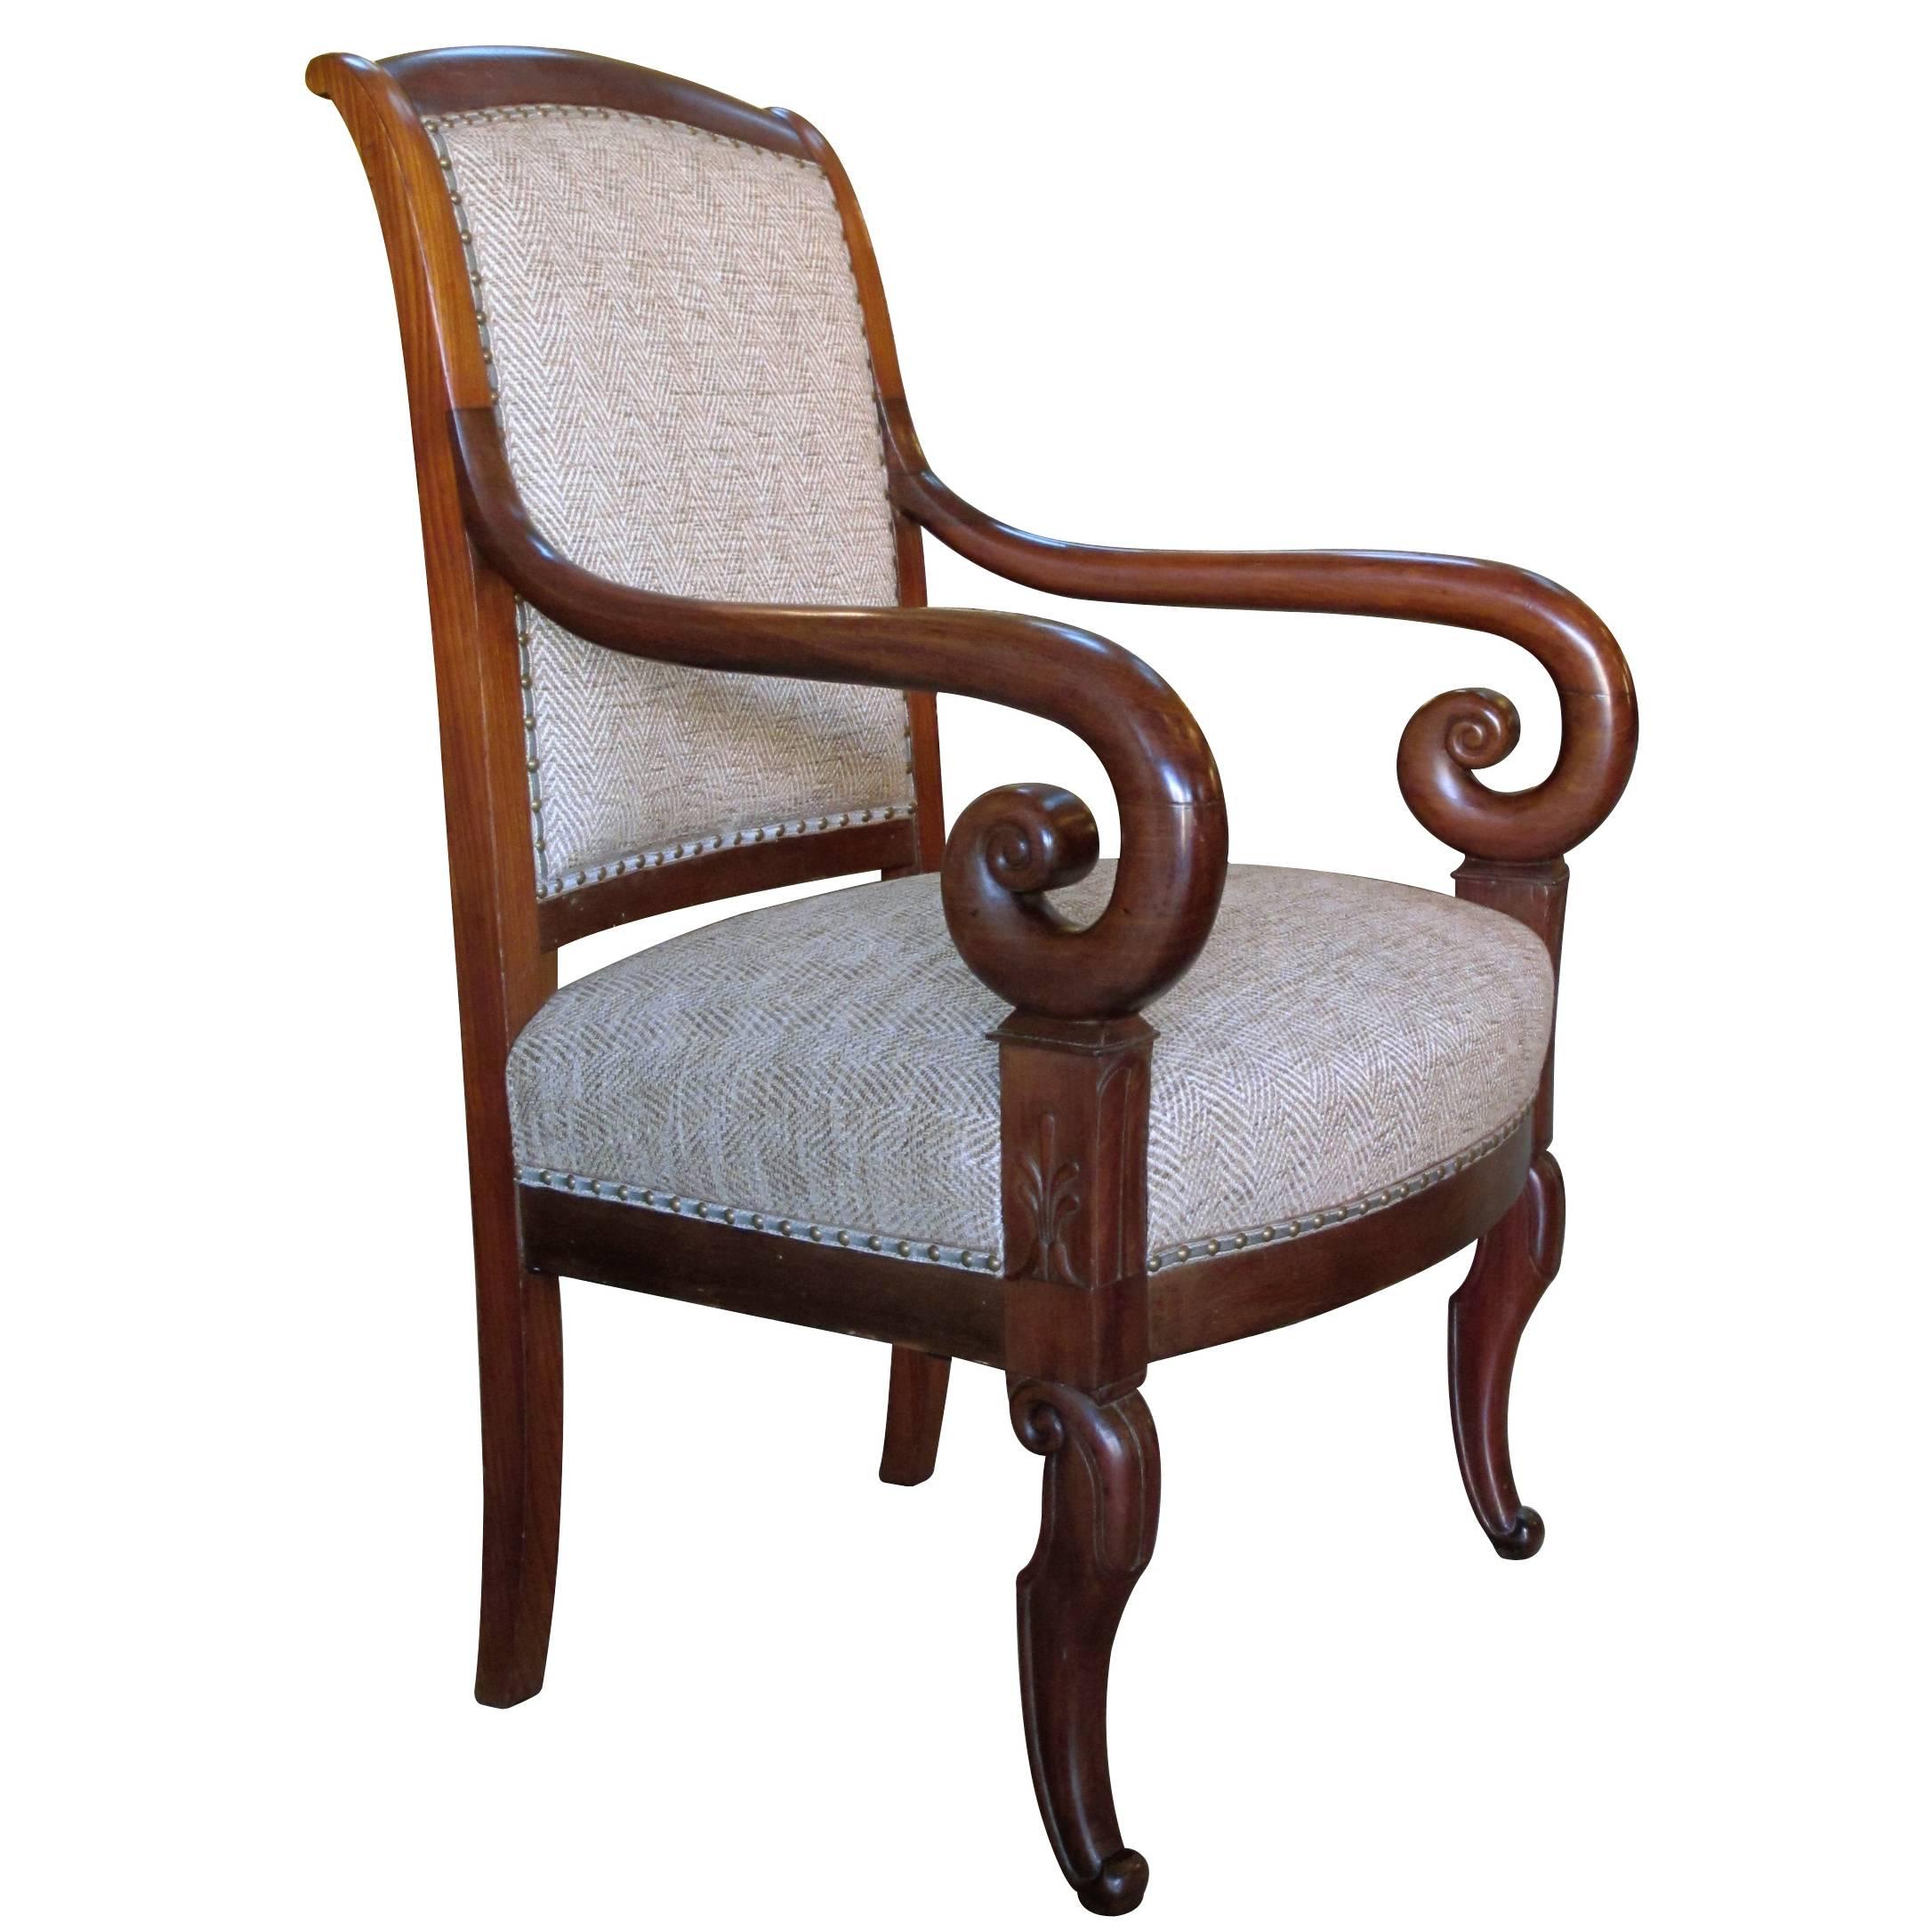 A Handsome French Restauration Mahogany Armchair